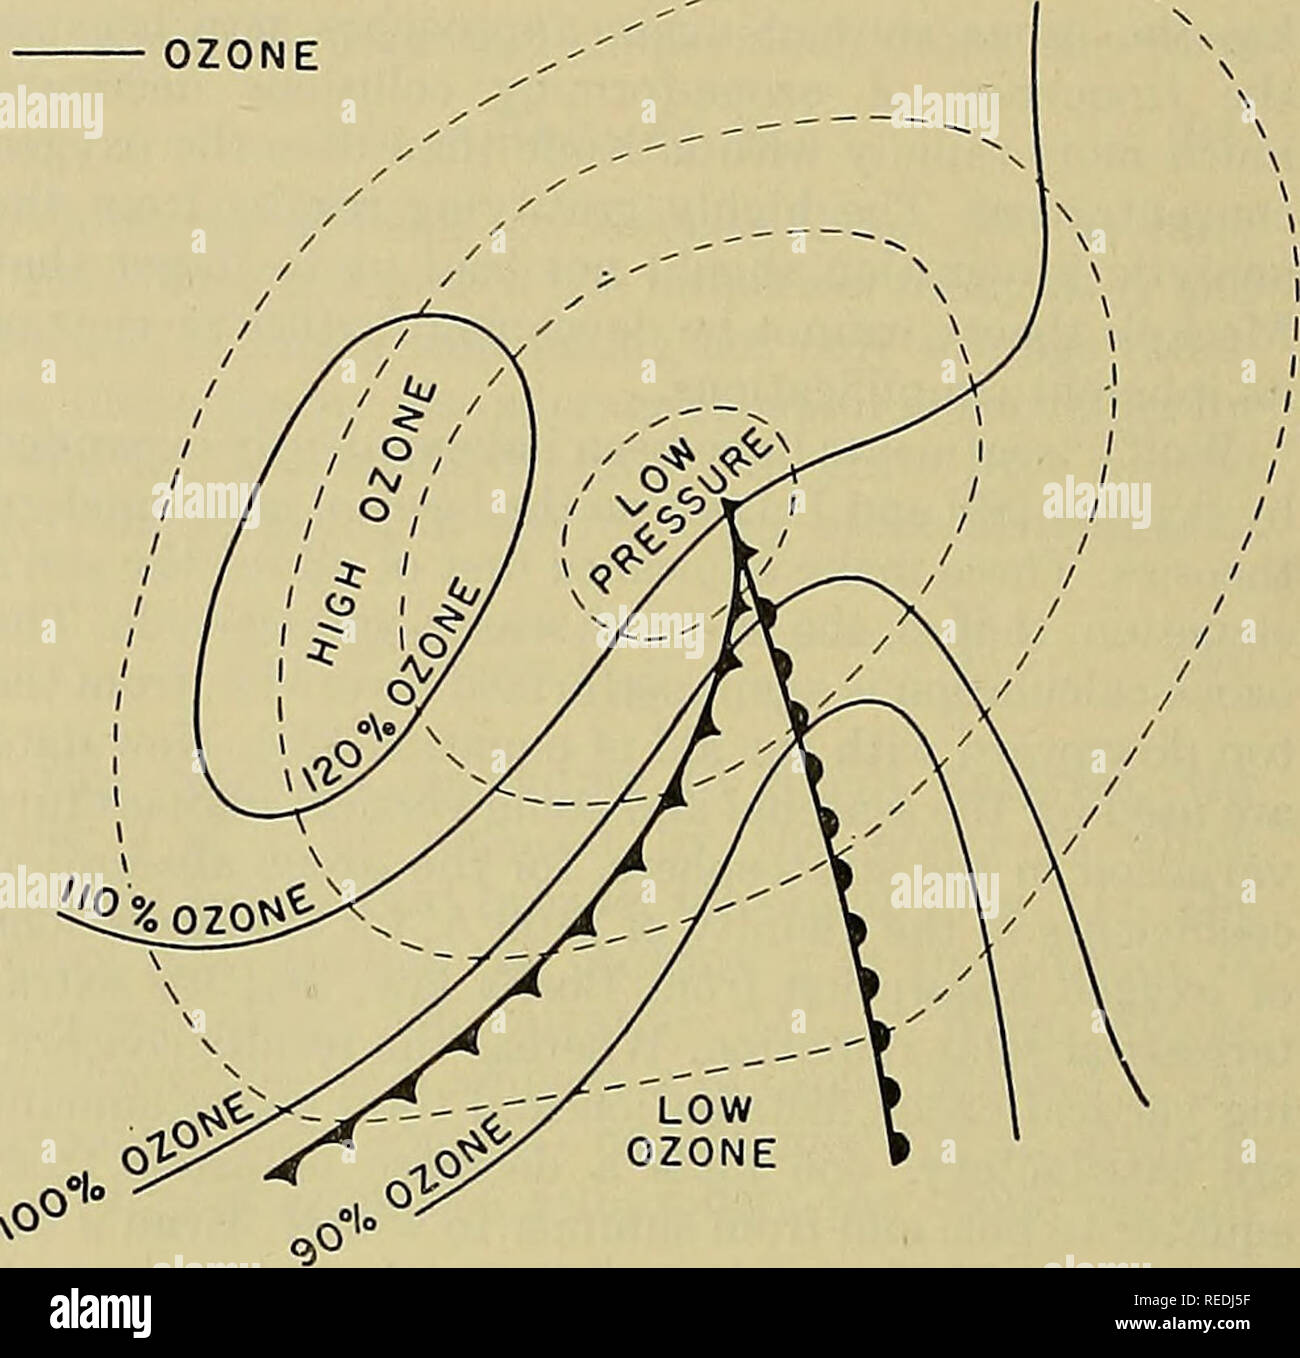 Compendium of meteorology. Meteorology. 284 THE UPPER ATMOSPHERE E. Regener  concerning separation in the atmosphere; for the equatorial zone it is  assumed that the turbulence extends to higher altitudes corresponding to